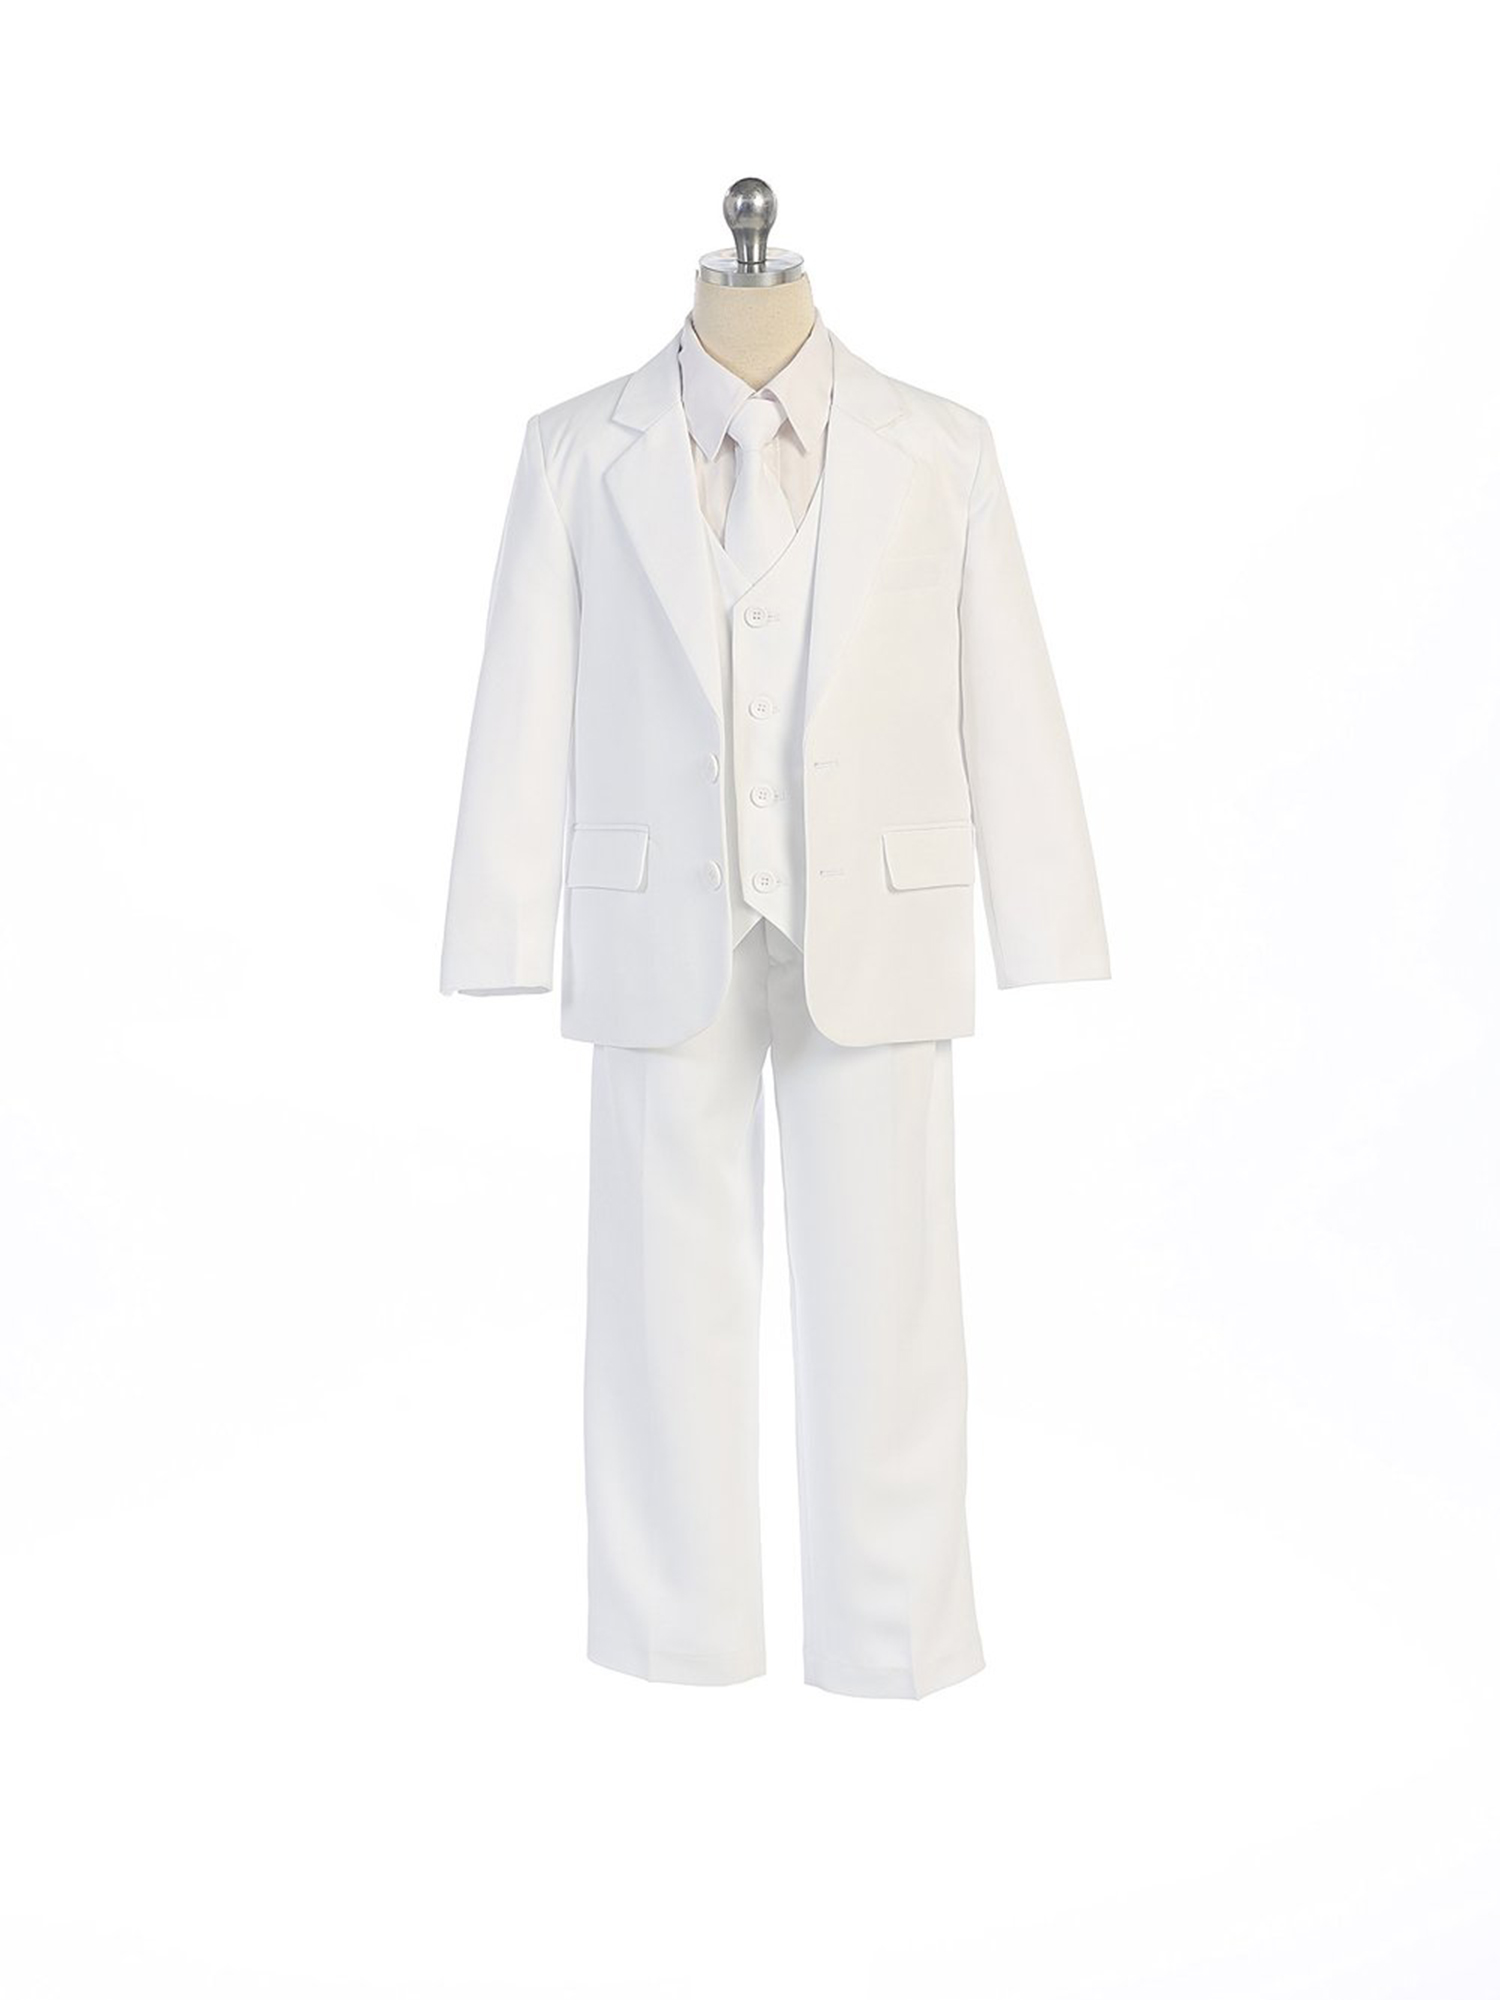 COLE Boys Suit with Shirt and Vest (5-Piece) - (10 Husky, White)